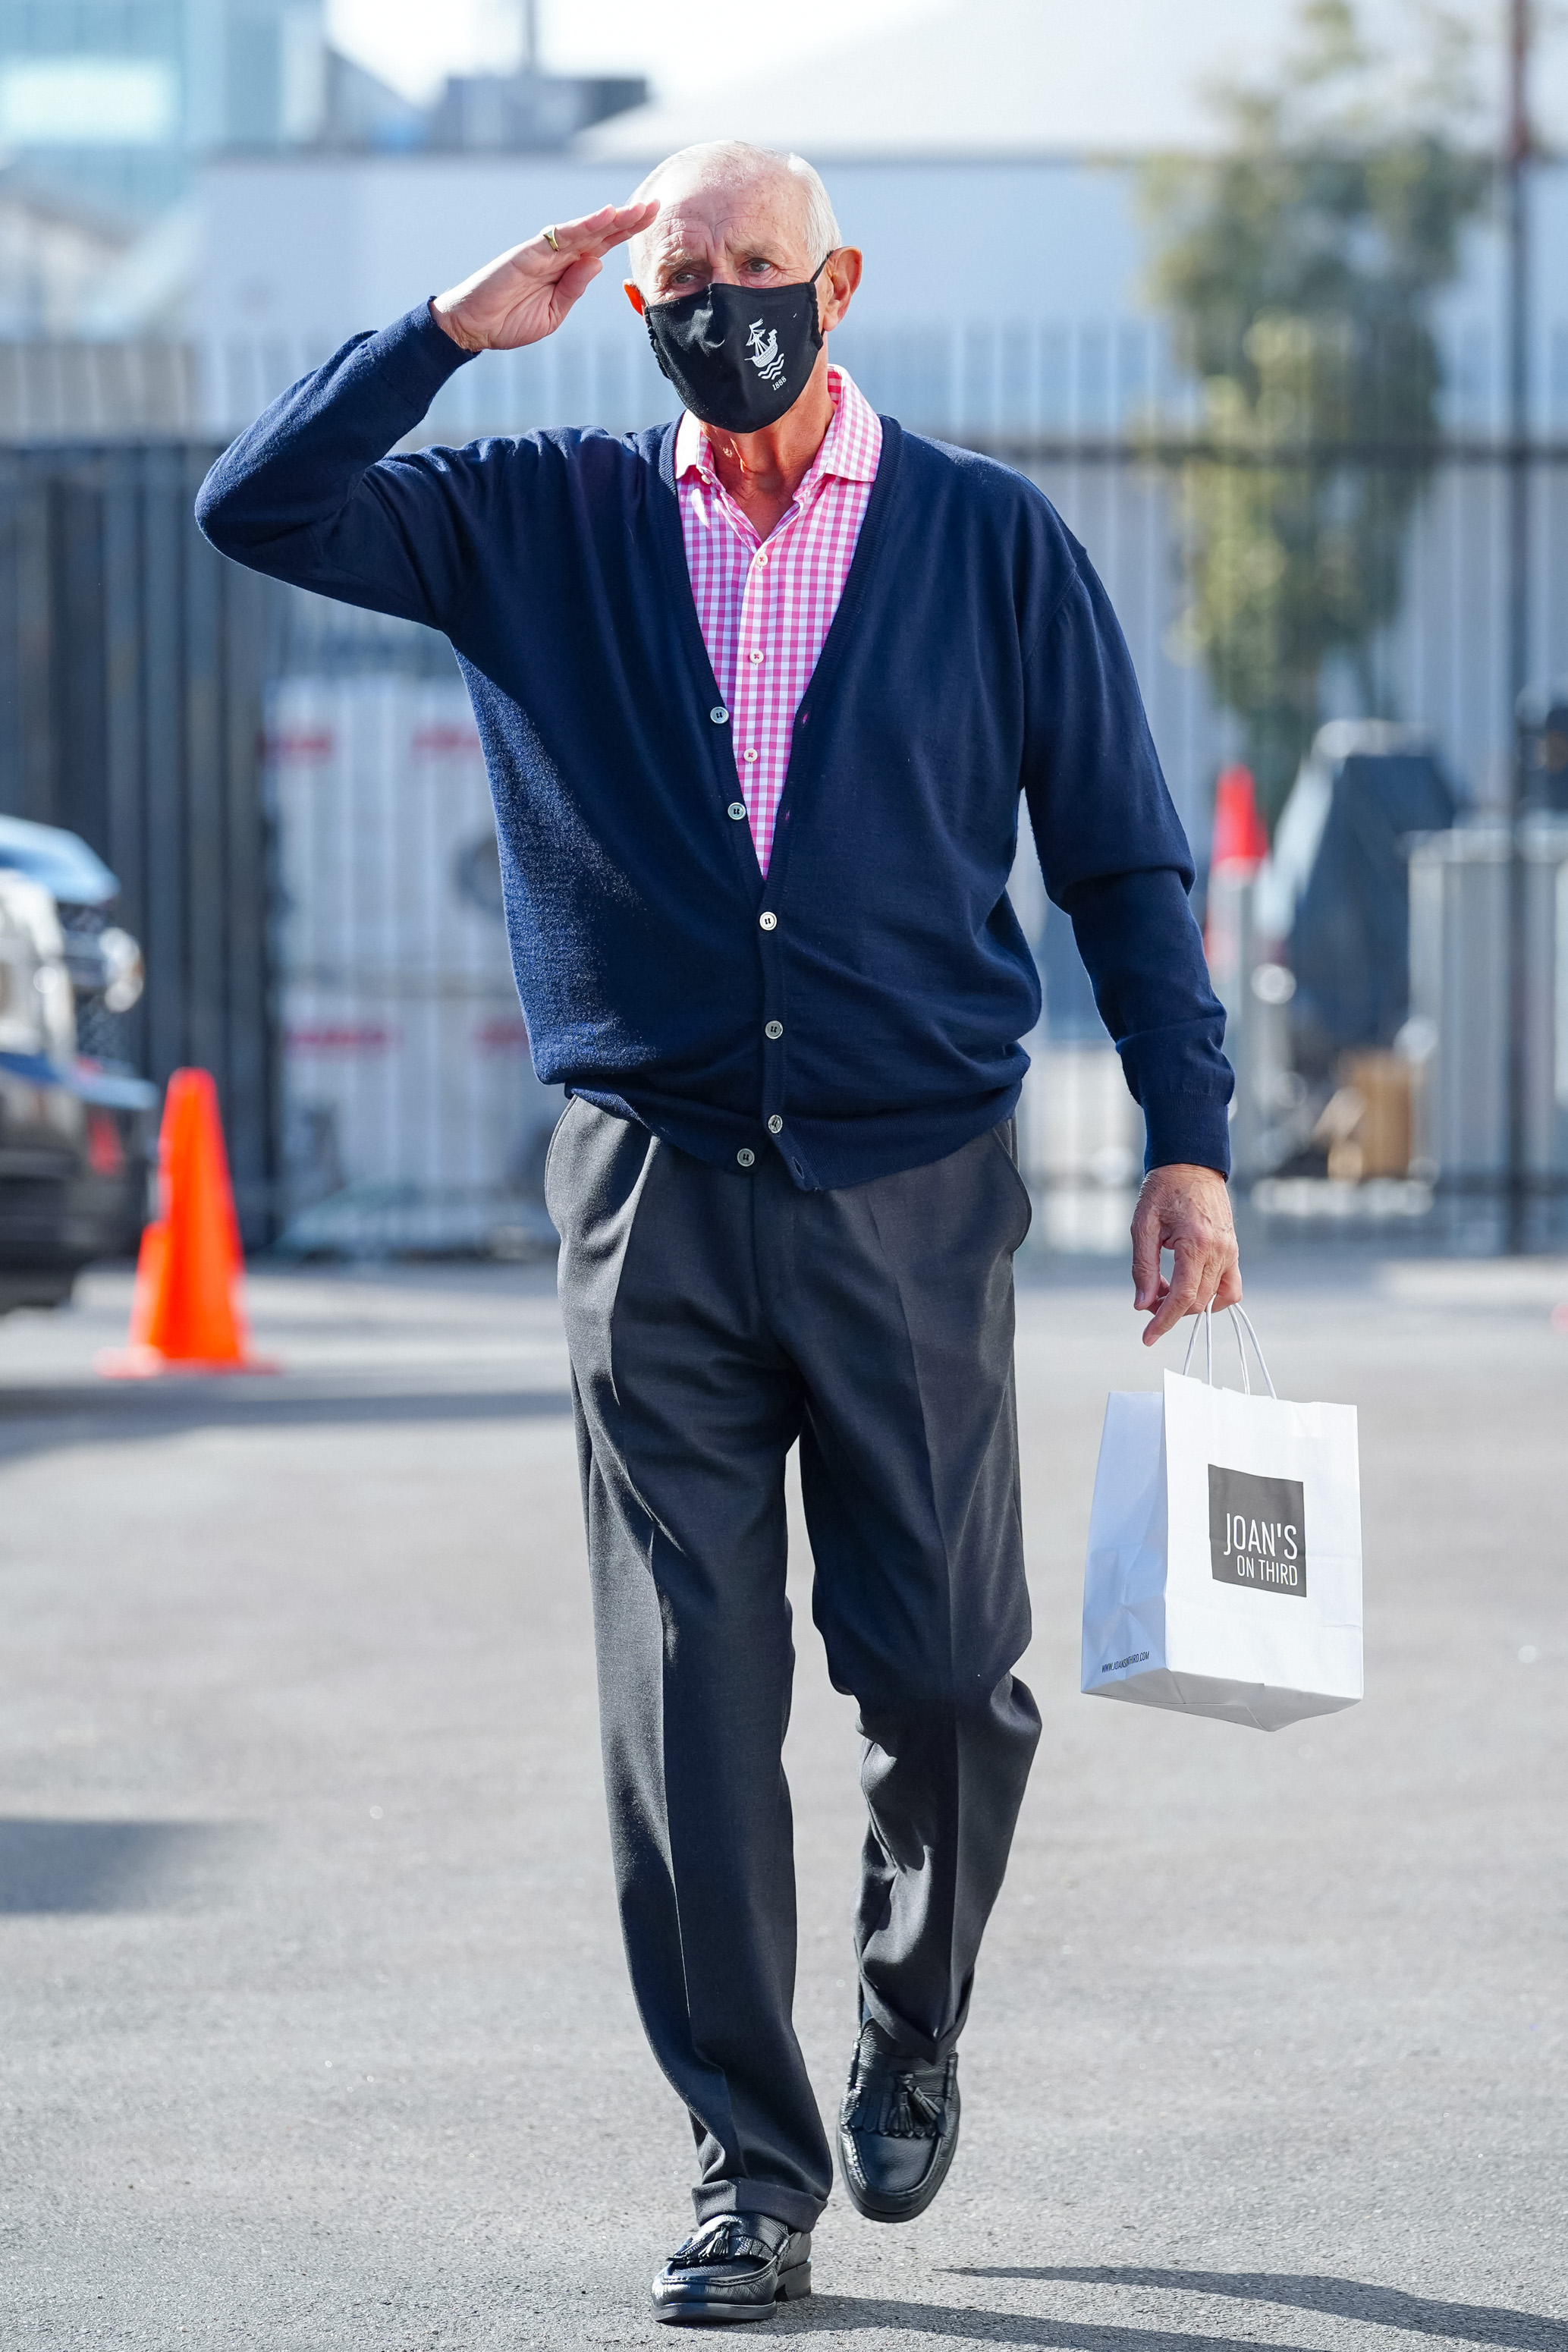 Len Goodman spotted at the "Dancing with the Stars" rehearsal studio in Los Angeles 2021 | Source: Getty Images